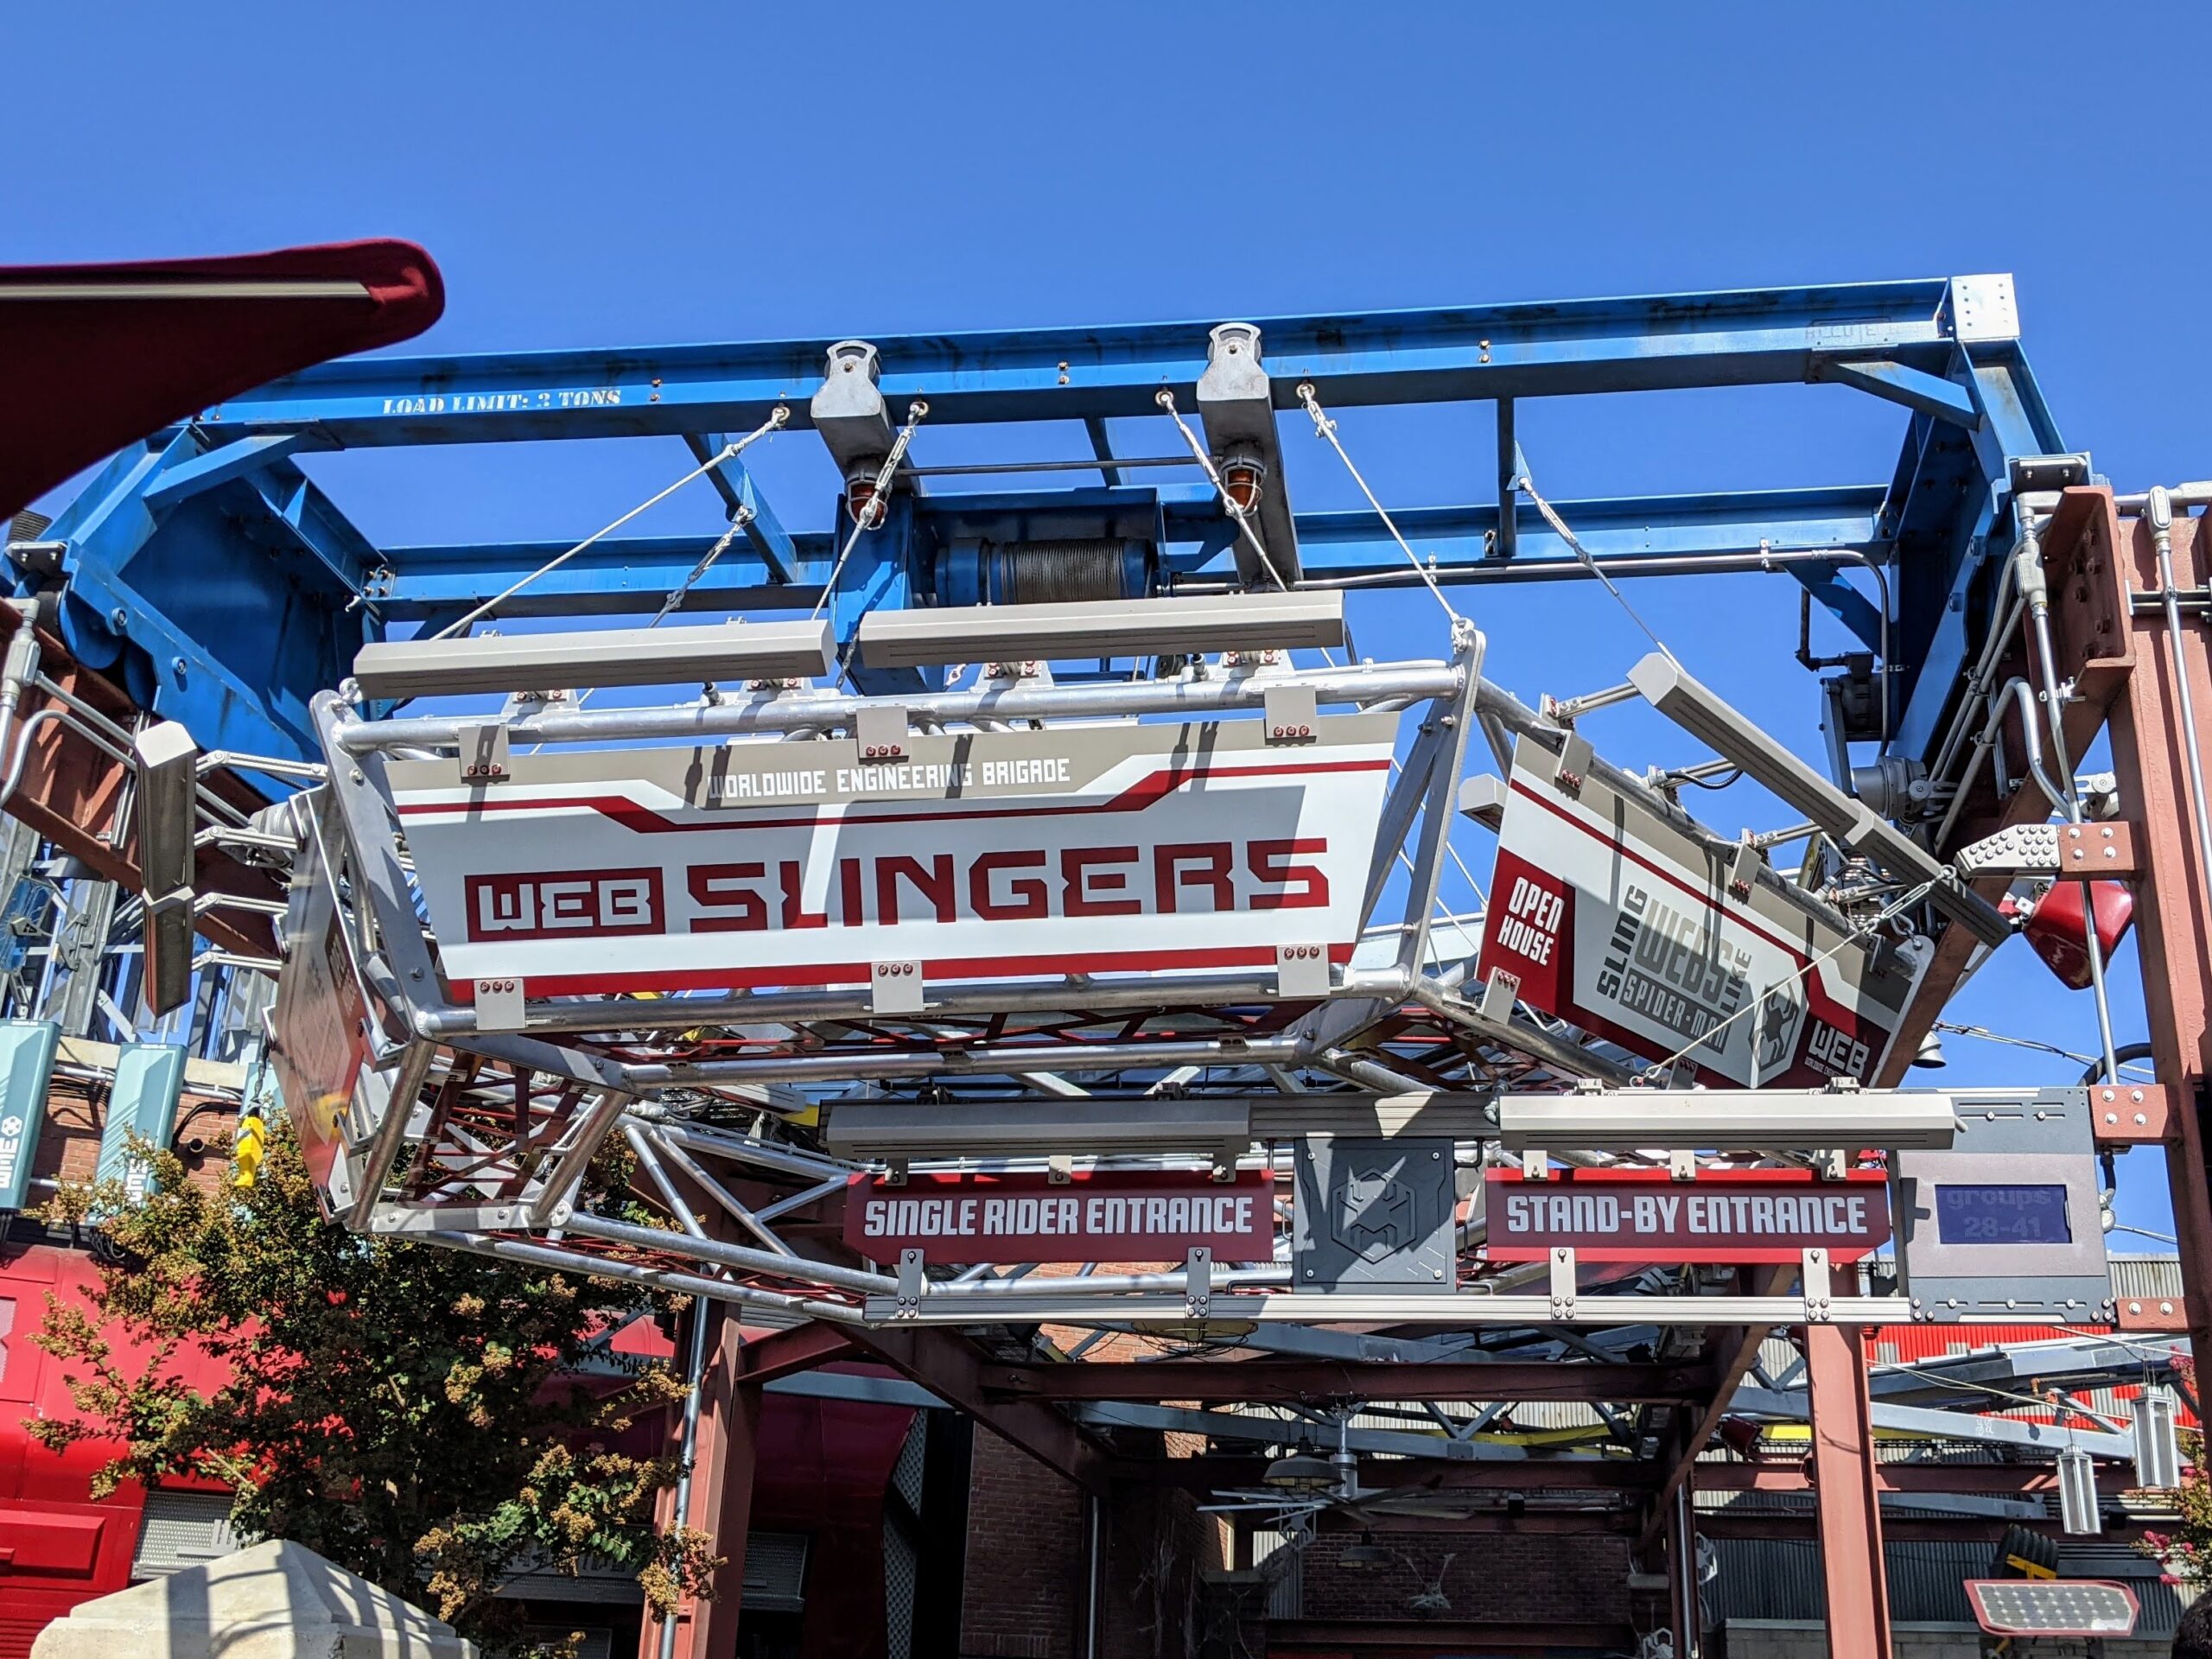 WEB SLINGERS - A Spider-Man Adventure Attraction Entrance